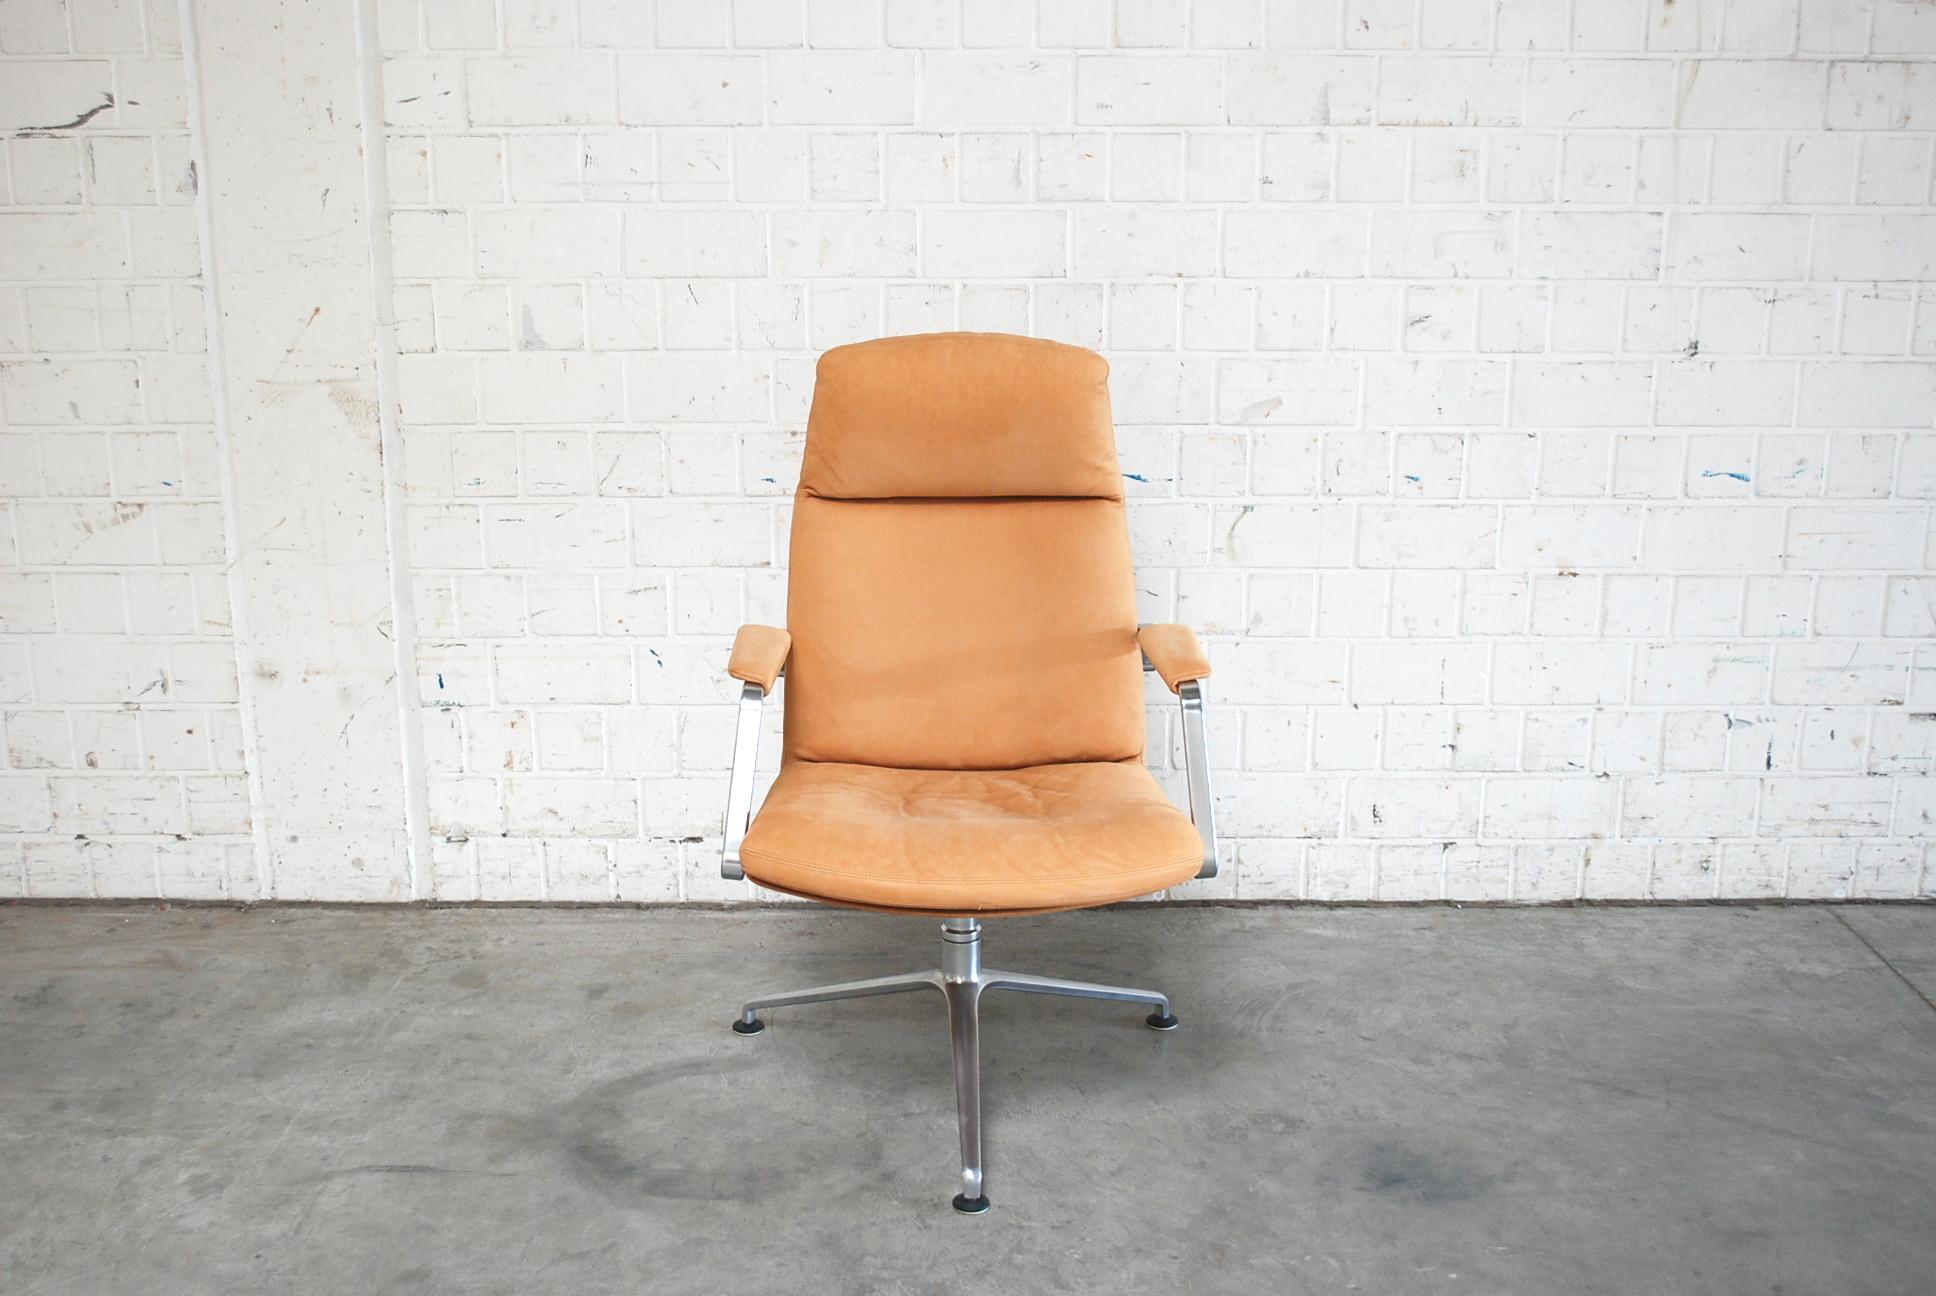 This office armchair FK 86 was made by Jorgen Kastholm & Preben Fabricius for Kill international.
This is the Office Chair  for the working area.The headrest is a  lower than the Lounge Version.
It has a three-leg swivel aluminium base and a thick